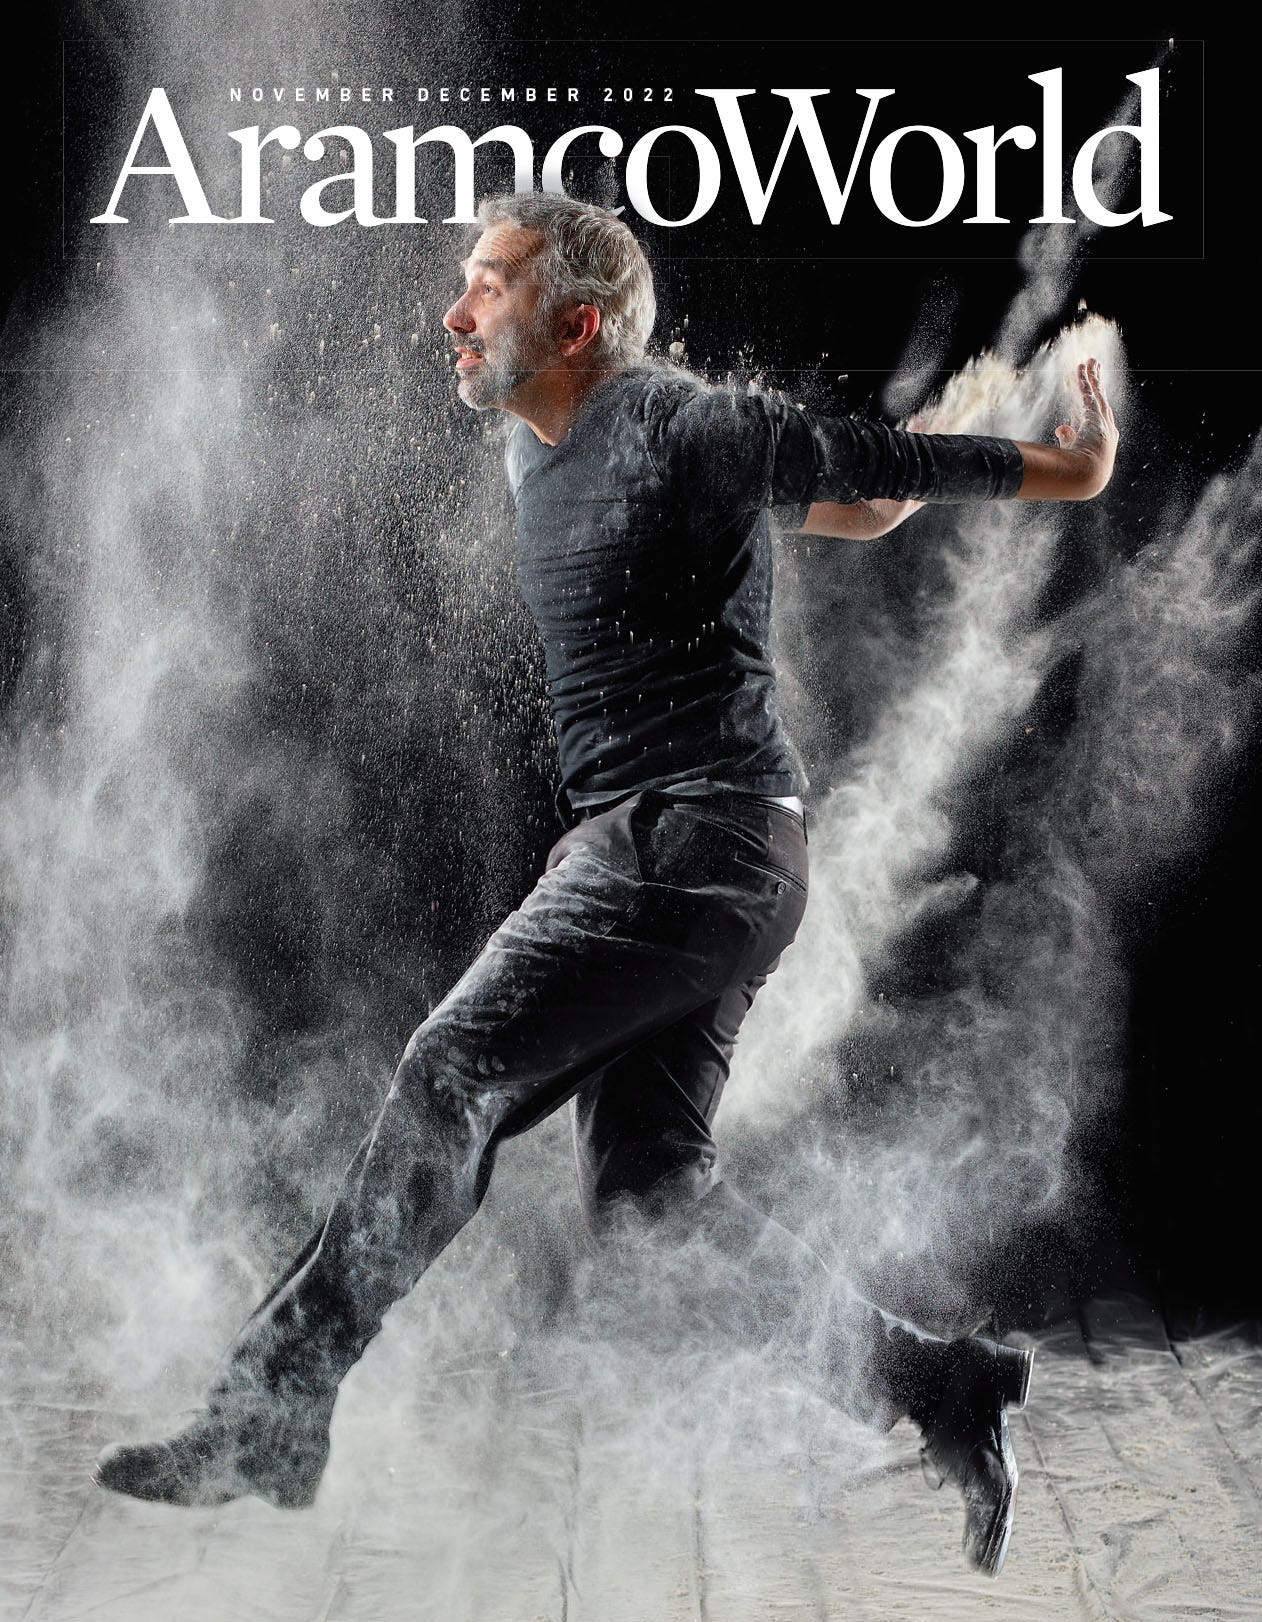 Andrew featured on the cover of AramcoWorld Magazine